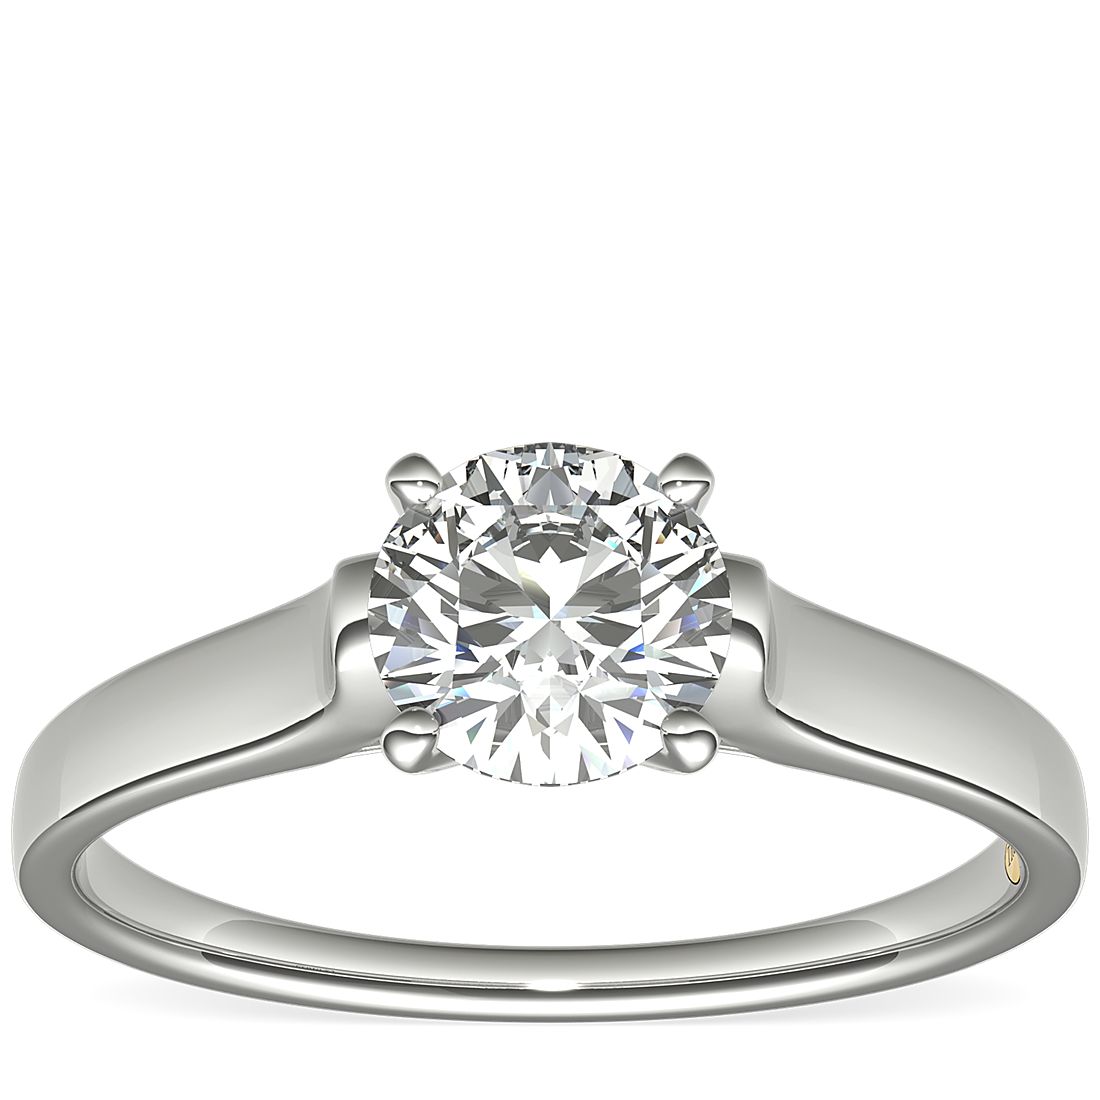 1 Carat Ready-to-Ship ZAC ZAC POSEN Cathedral Solitaire Plus Diamond Engagement Ring in Platinum